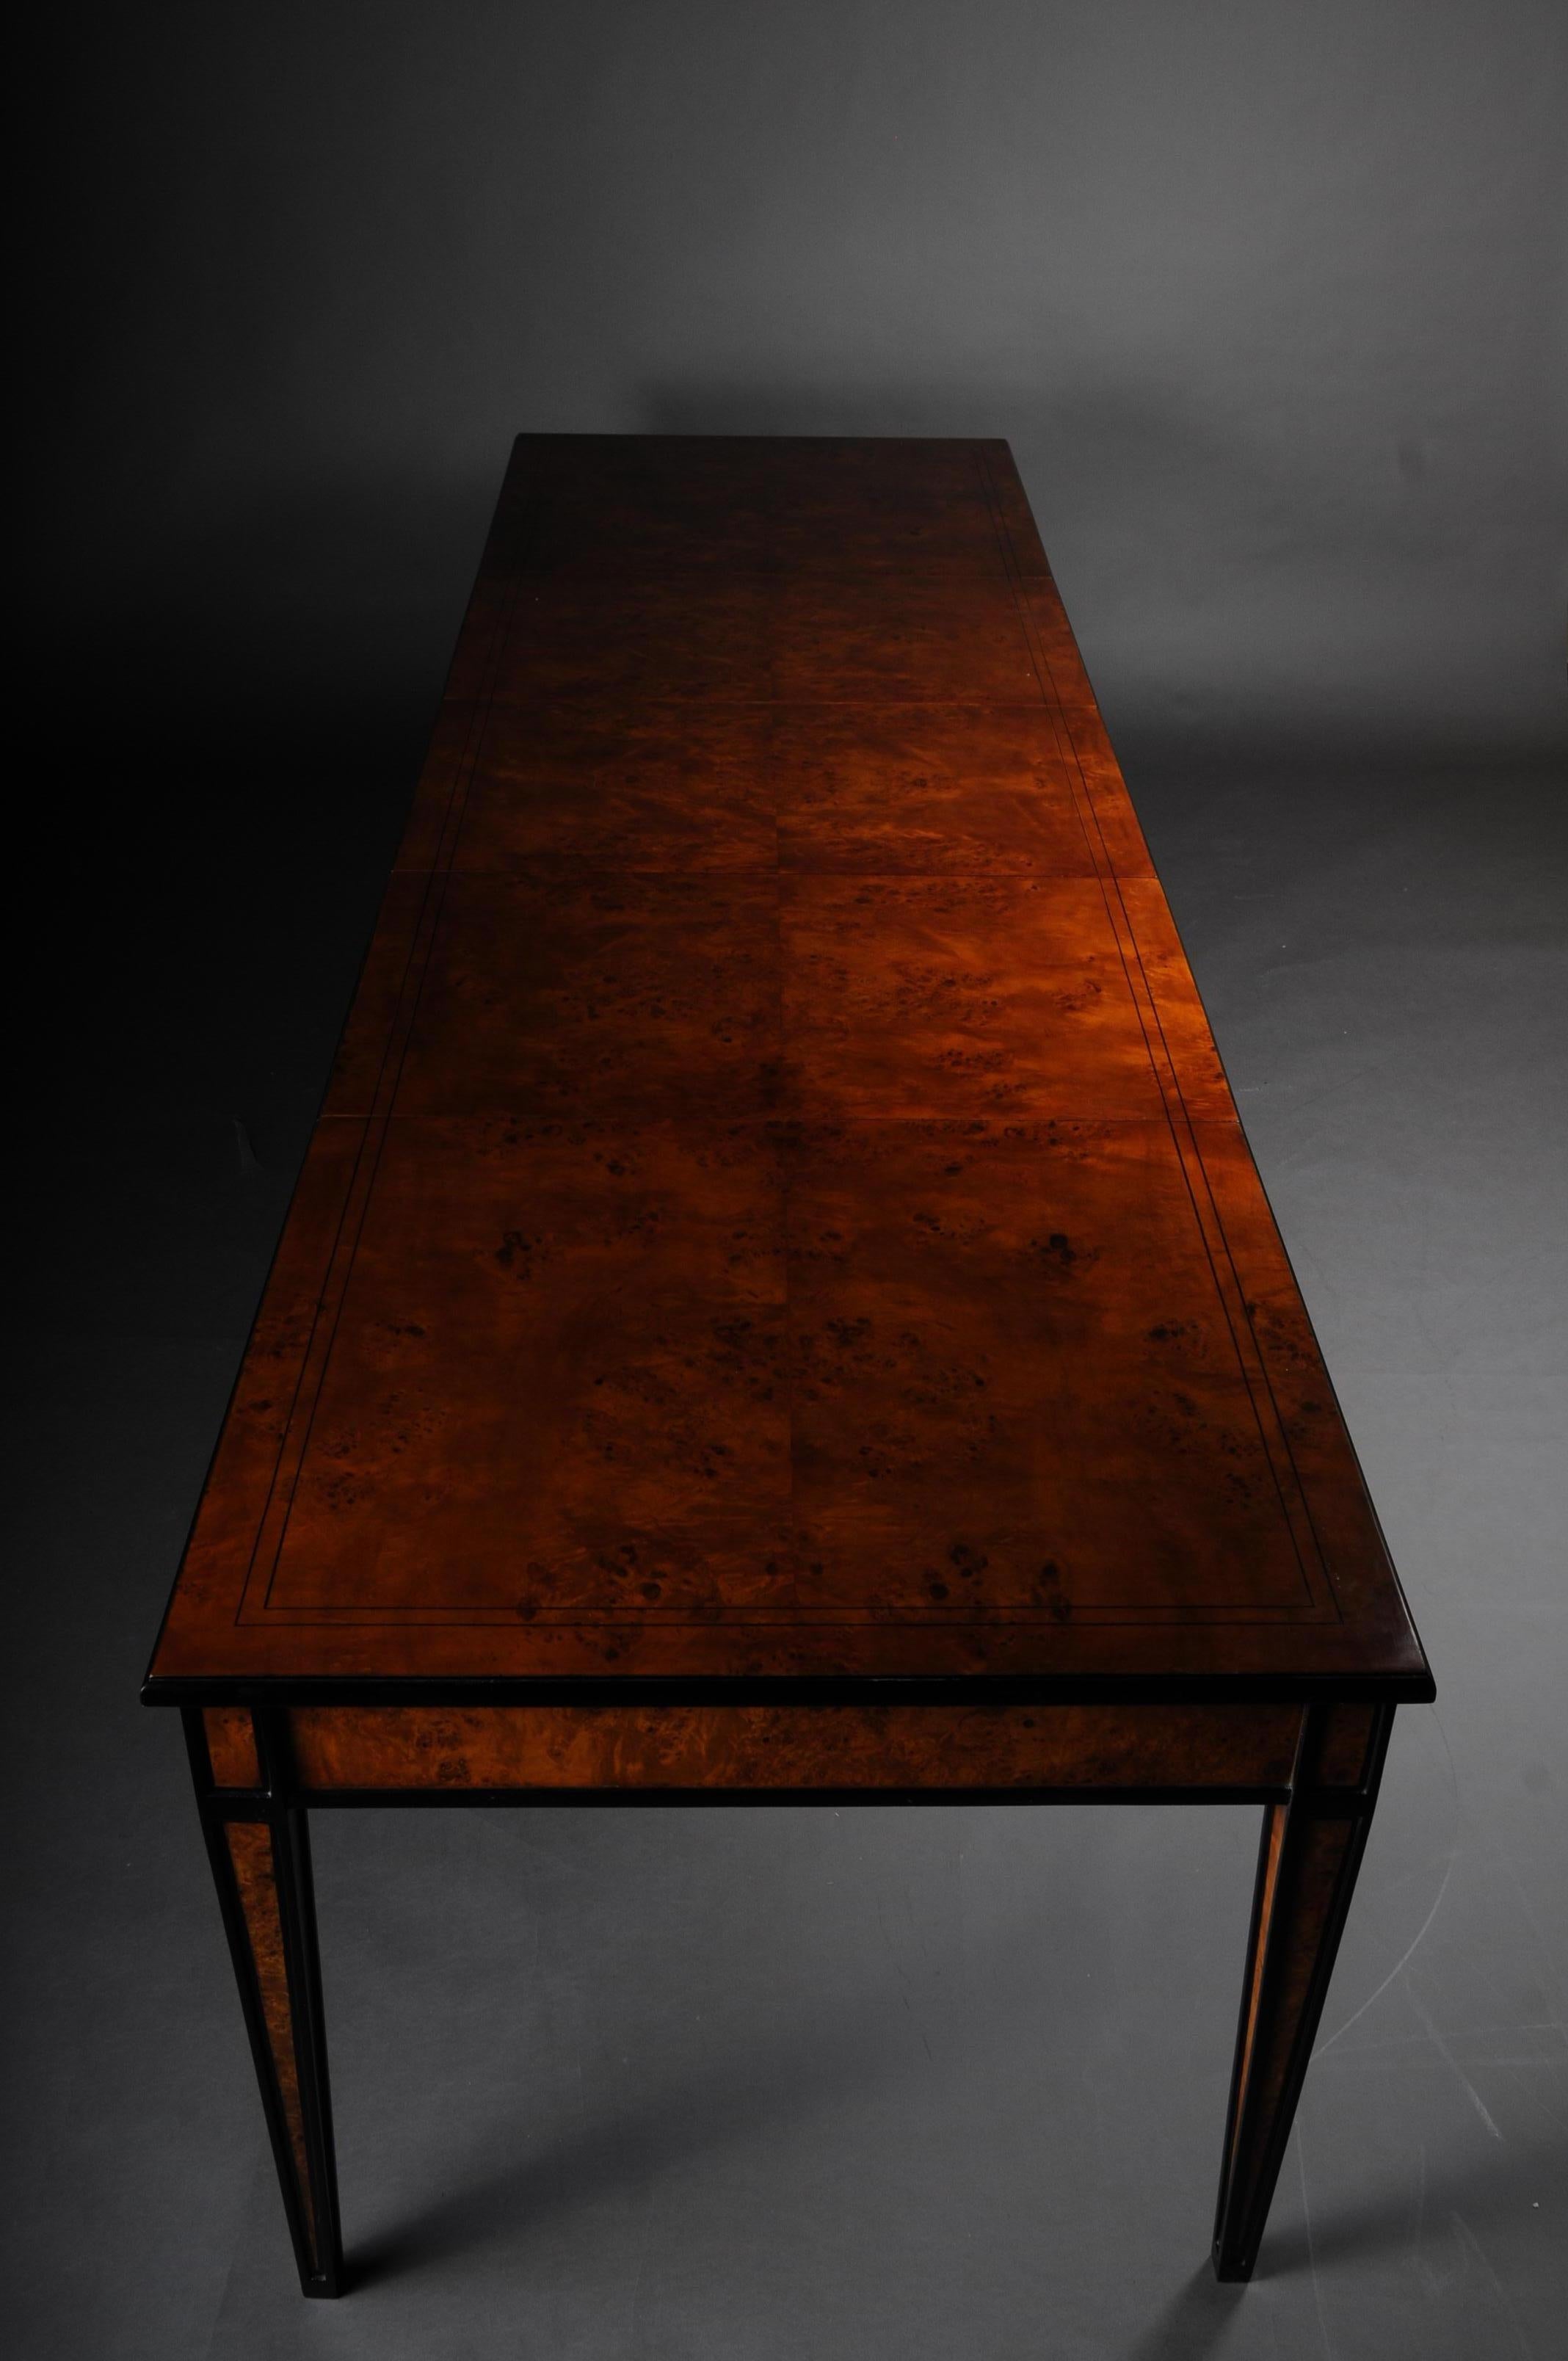 20th Century Dining Table / Conference Table, Extendable in Biedermeier Style, Maple